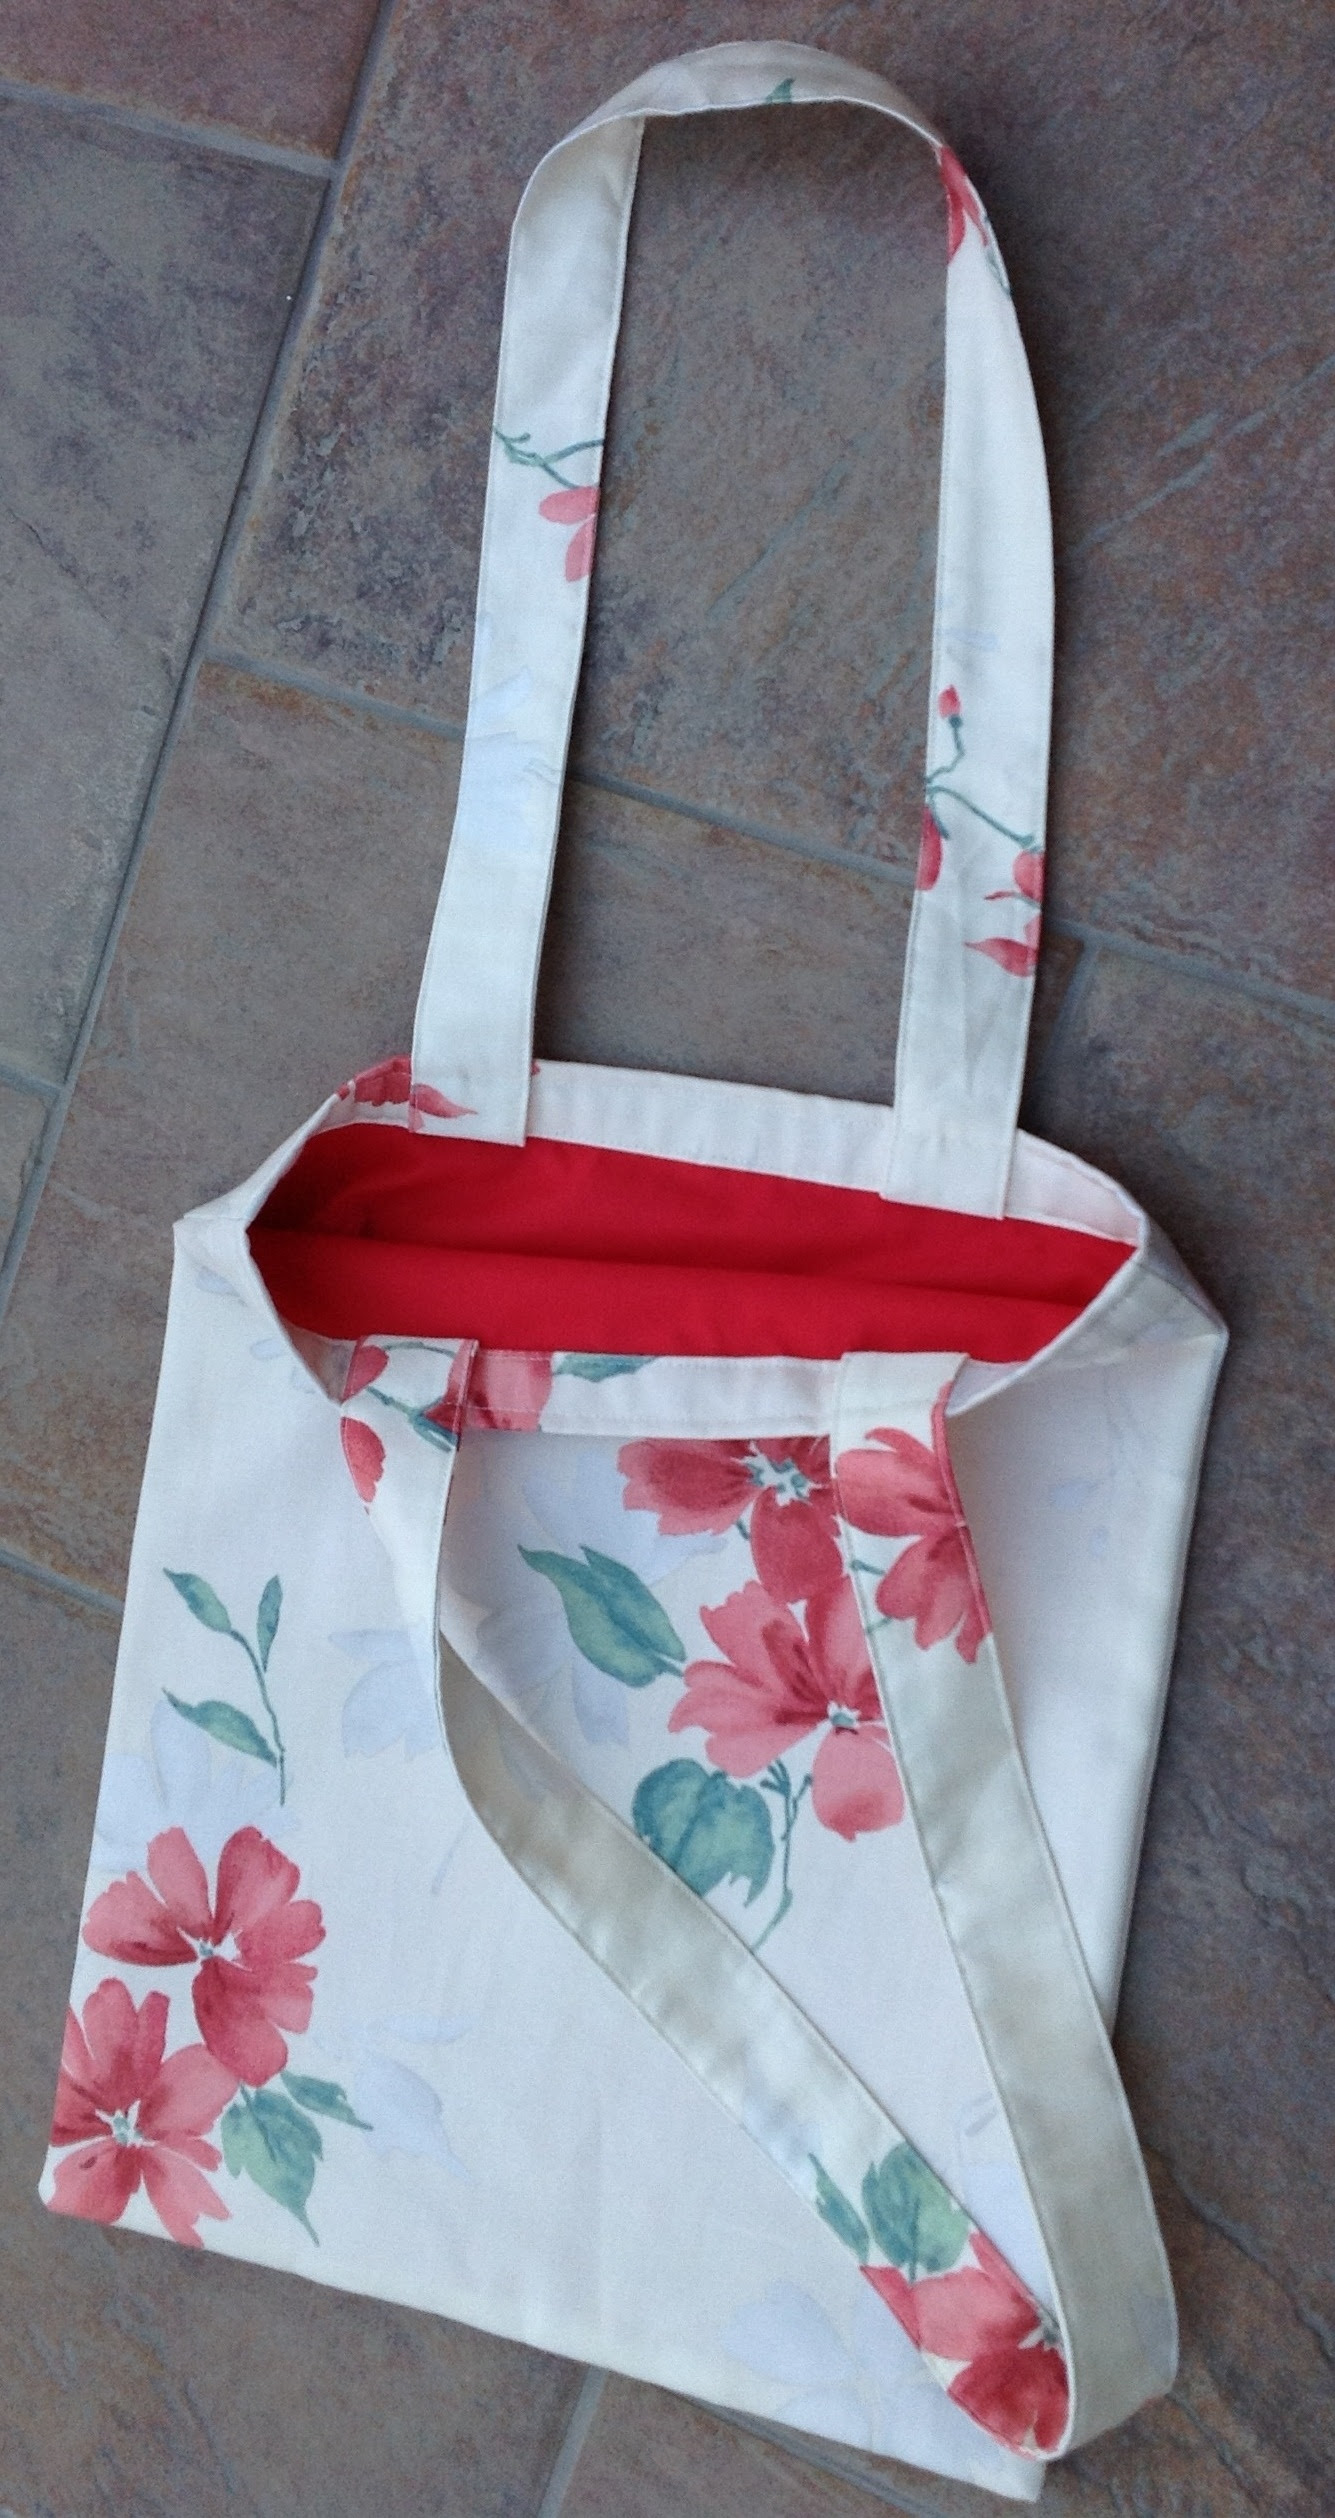 Tote Bag: How To Sew A Tote Bag With Lining